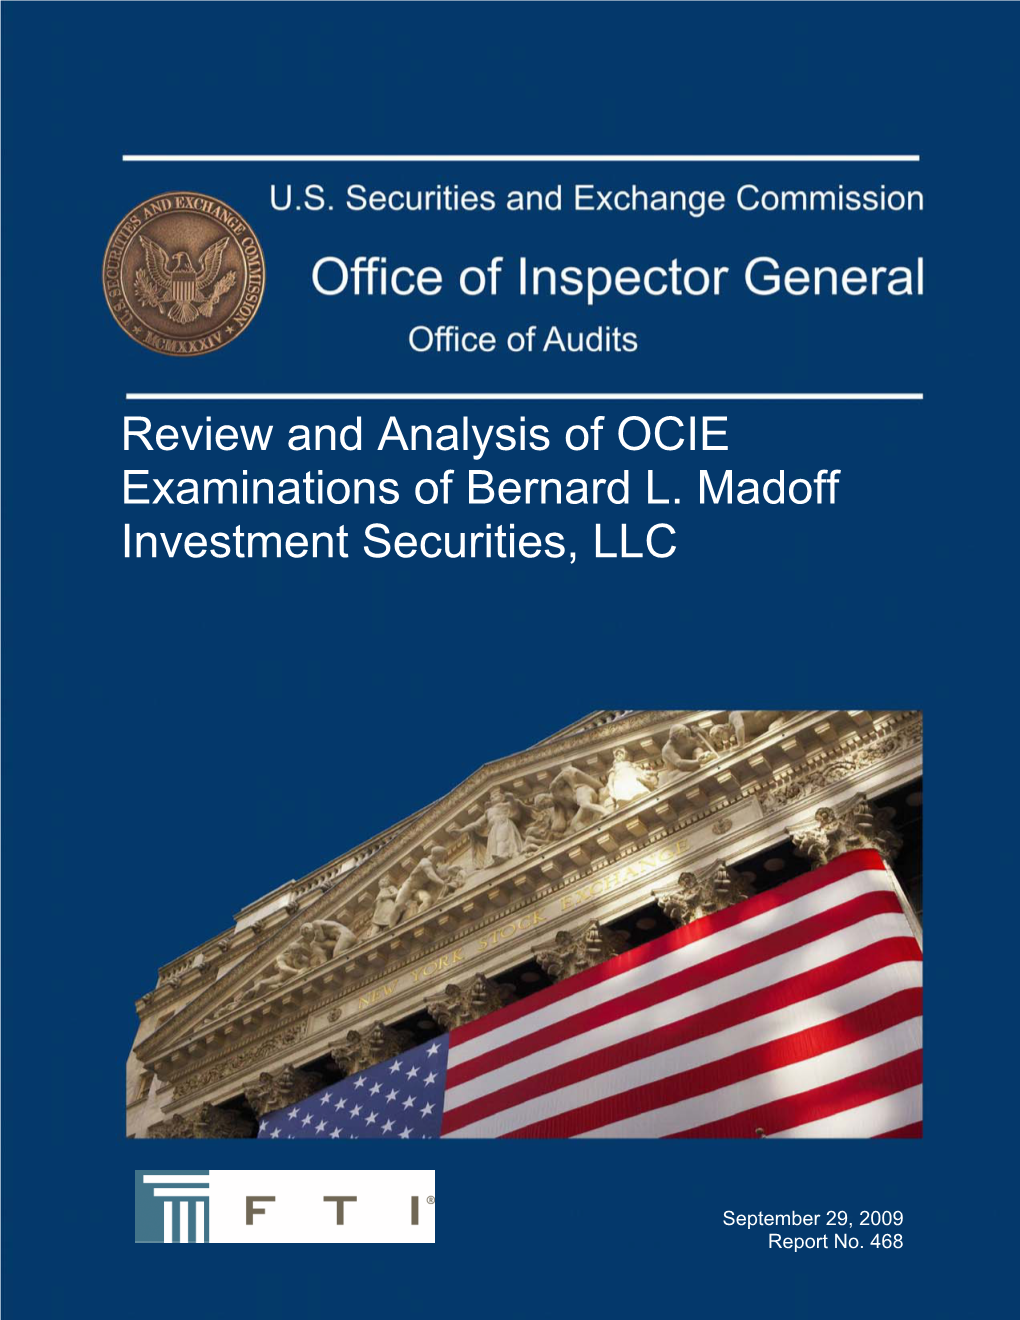 Review and Analysis of OCIE Examinations of Bernard L. Madoff Investment Securities, LLC